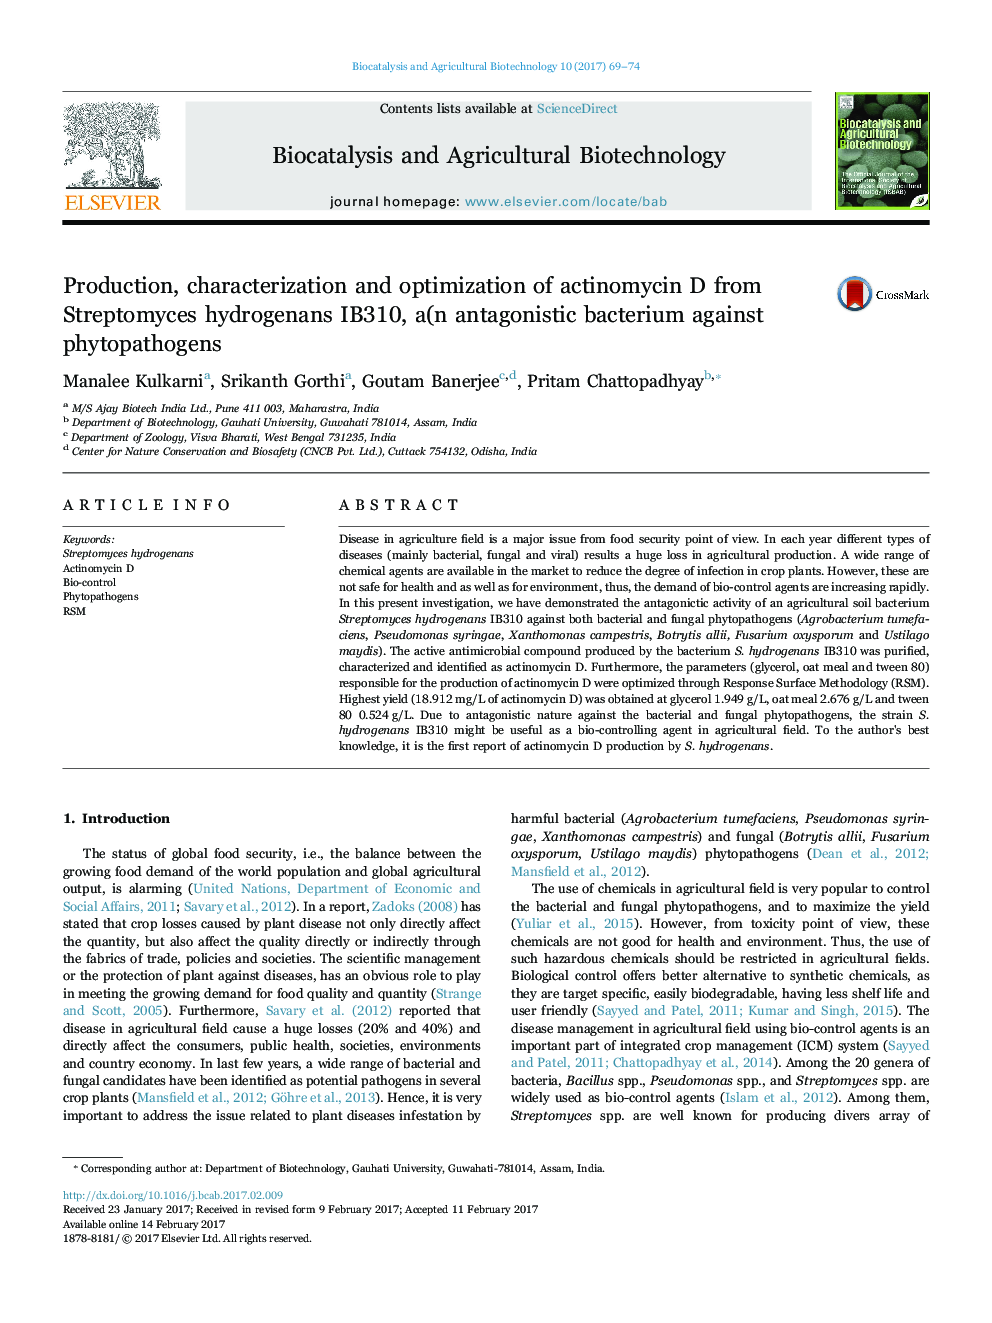 Production, characterization and optimization of actinomycin D from Streptomyces hydrogenans IB310, a(n antagonistic bacterium against phytopathogens